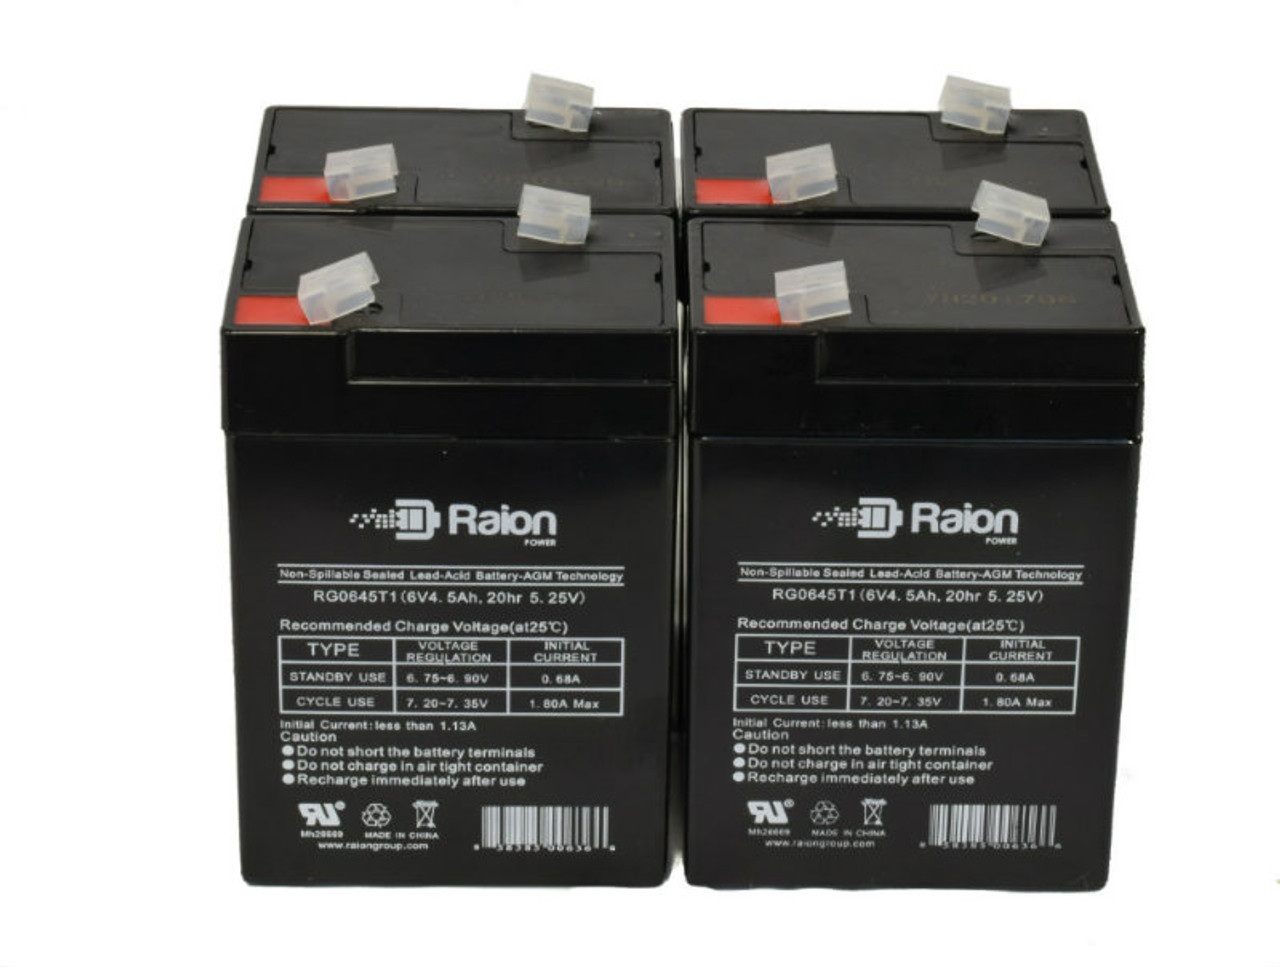 Raion Power 6V 4.5Ah Replacement Emergency Light Battery for Light Alarms SQL - 4 Pack